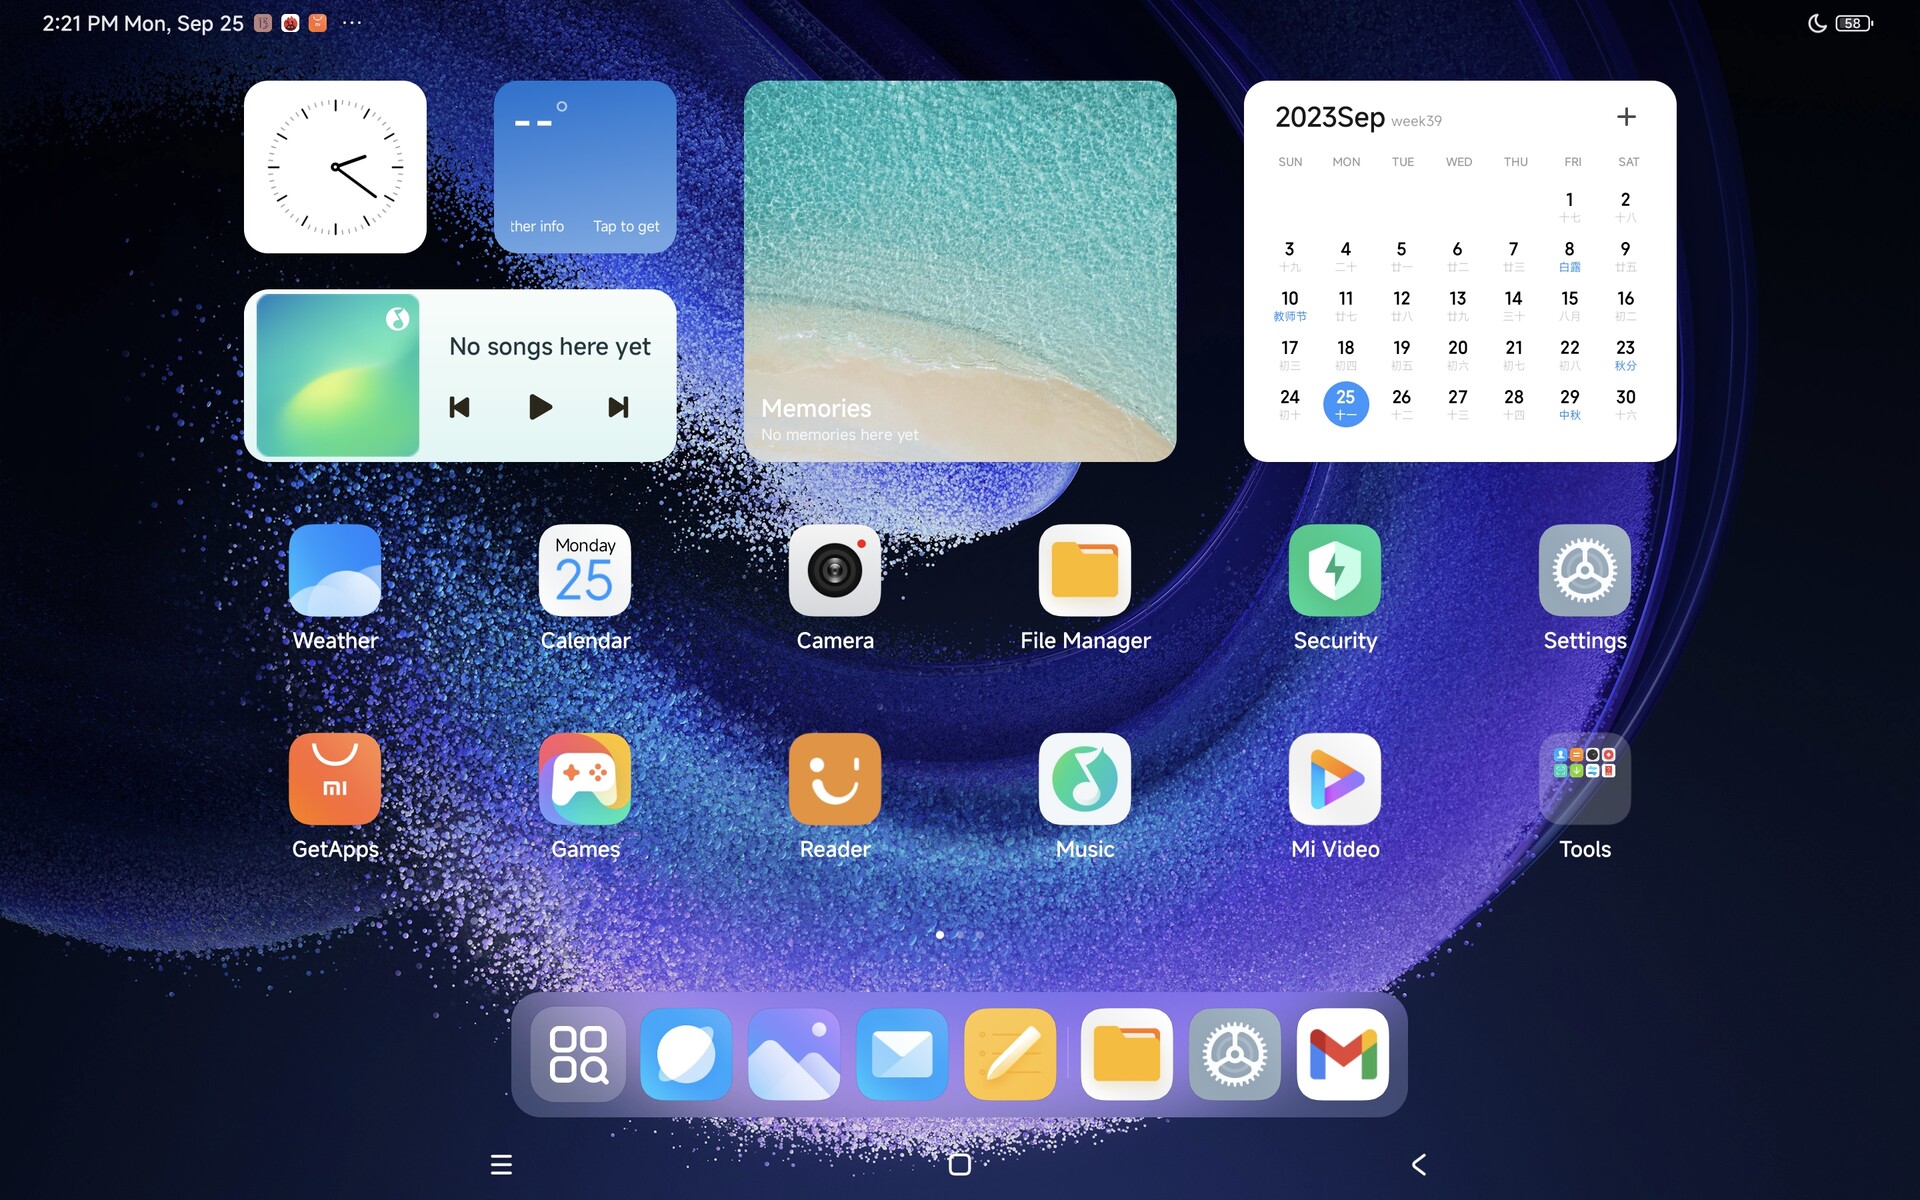 Xiaomi Pad 6 Max : la tablette tactile Android taille XXL